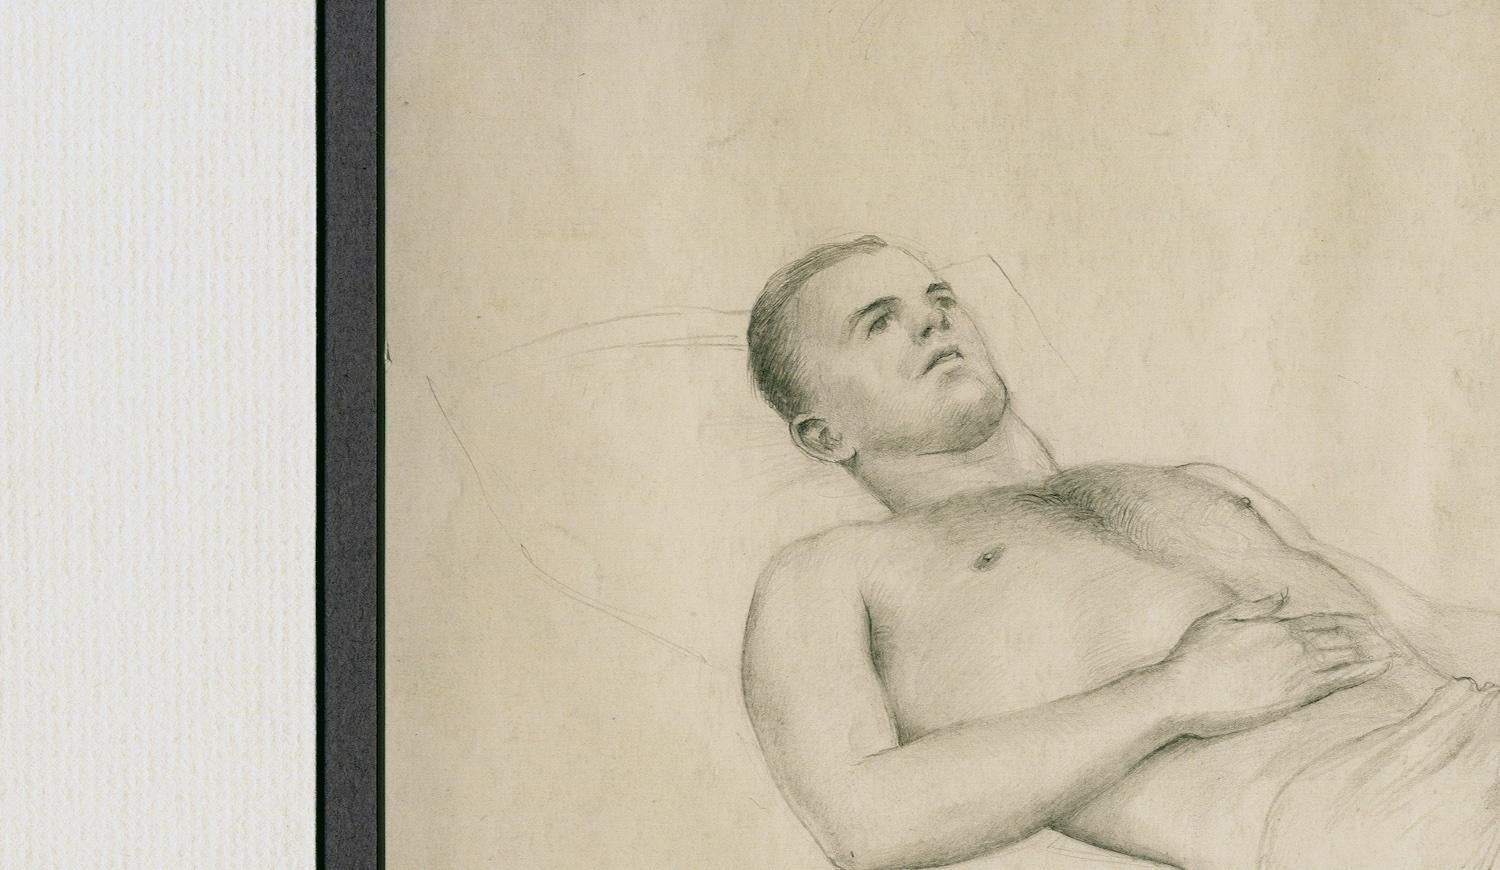 A rare pencil drawing by John Lear created in 1937, signed and dated in pencil.

John Brock Lear, Jr. 
Born:  1910 - Chestnut Hill, Pennsylvania
Died:   2008 - Glenside, Pennsylvania

A lifelong resident of Chestnut Hill, Lear played at Woodmere in